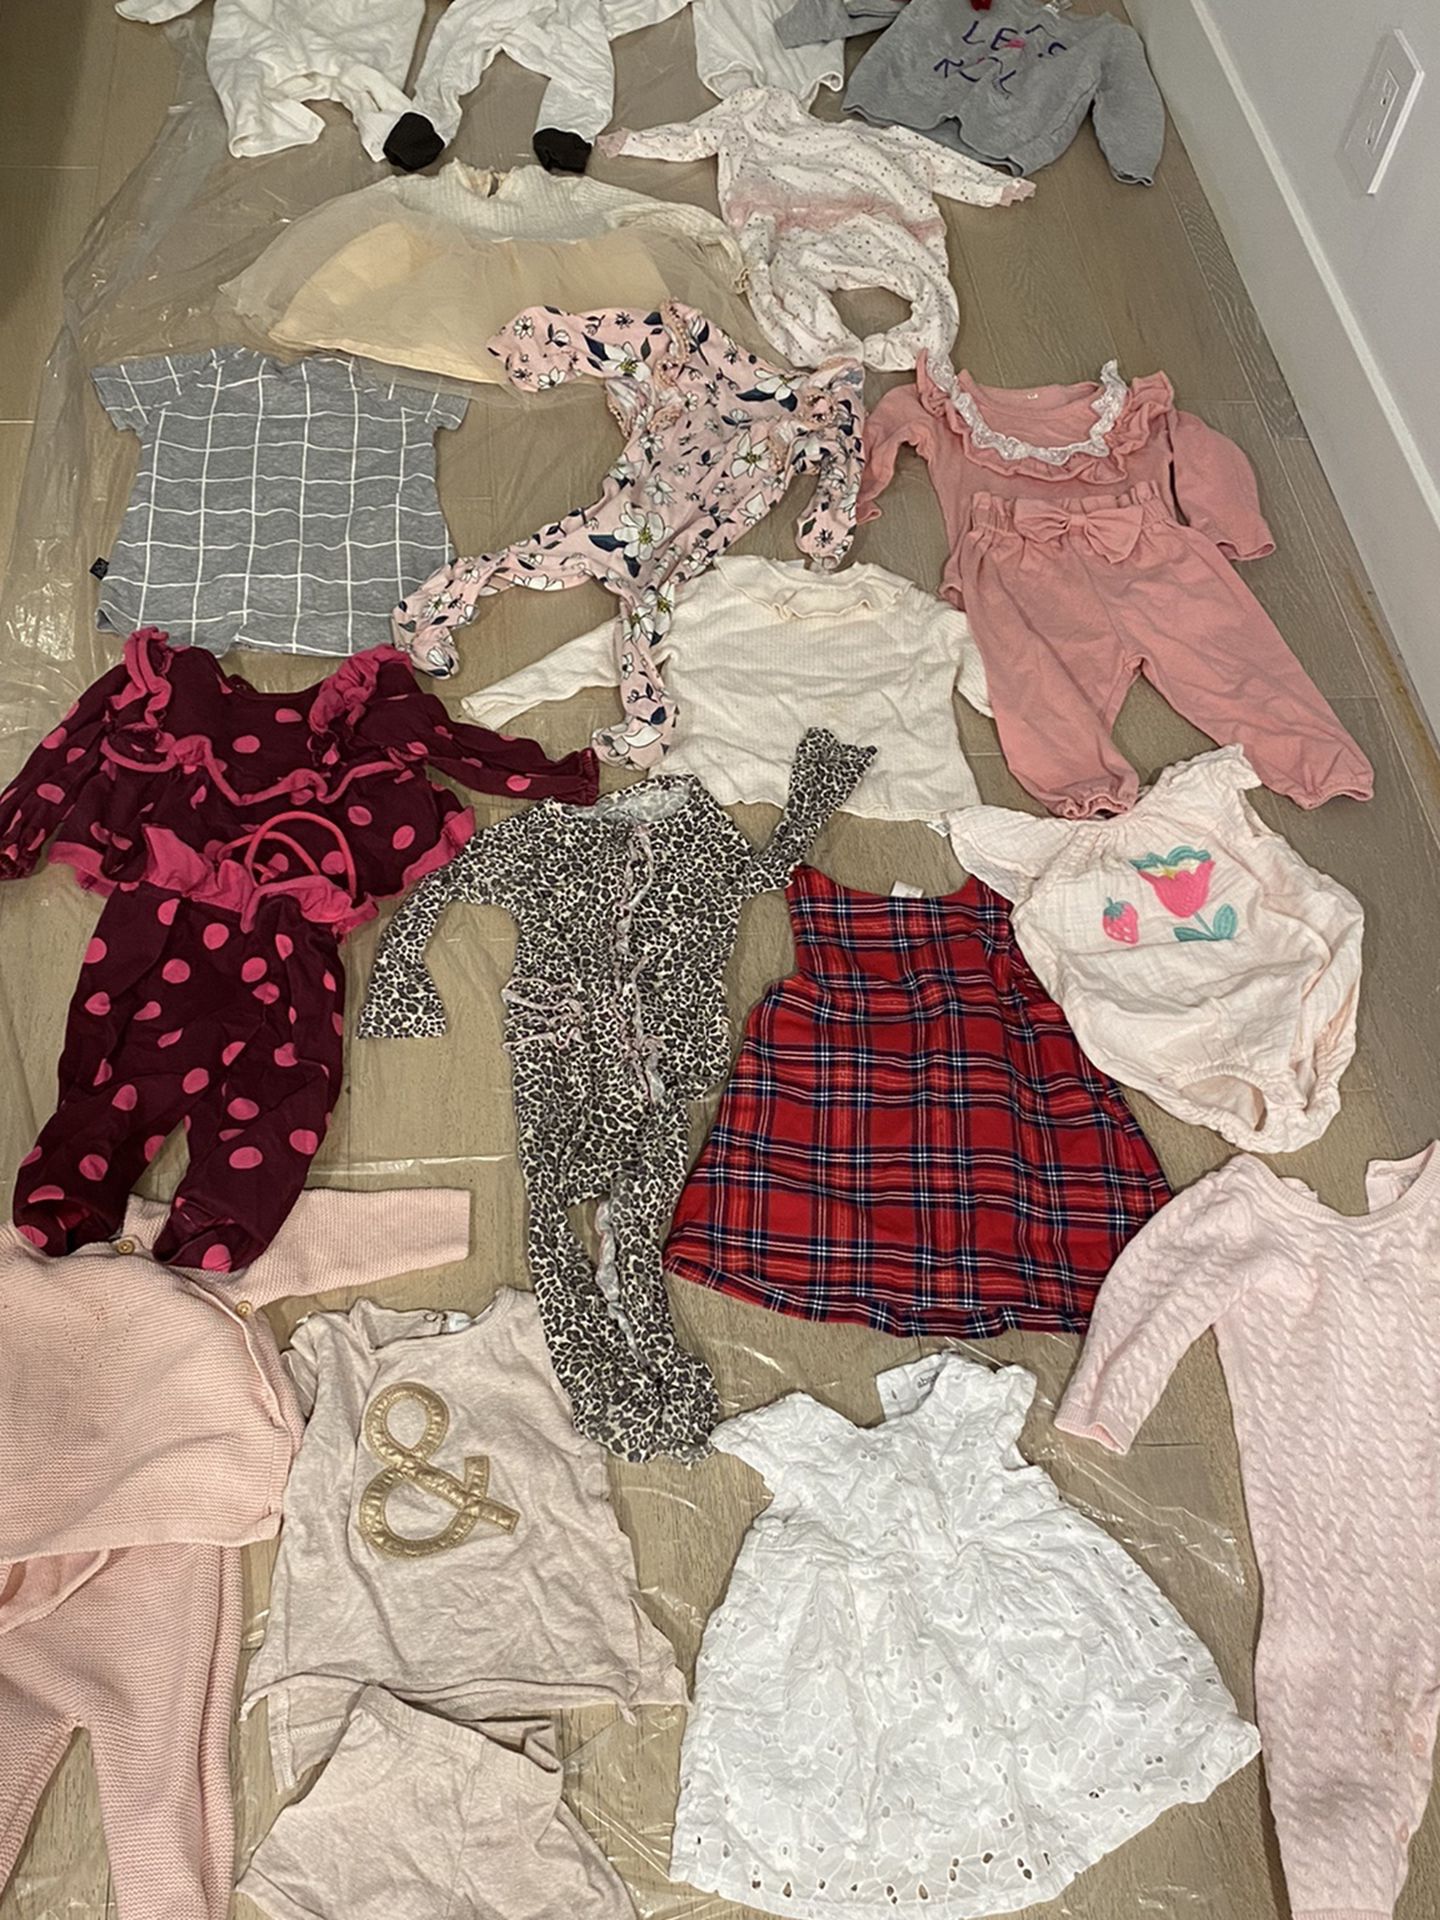 Hundreds Of Dollars Of Baby Girl Clothes Swip All Photos To See All Outfits